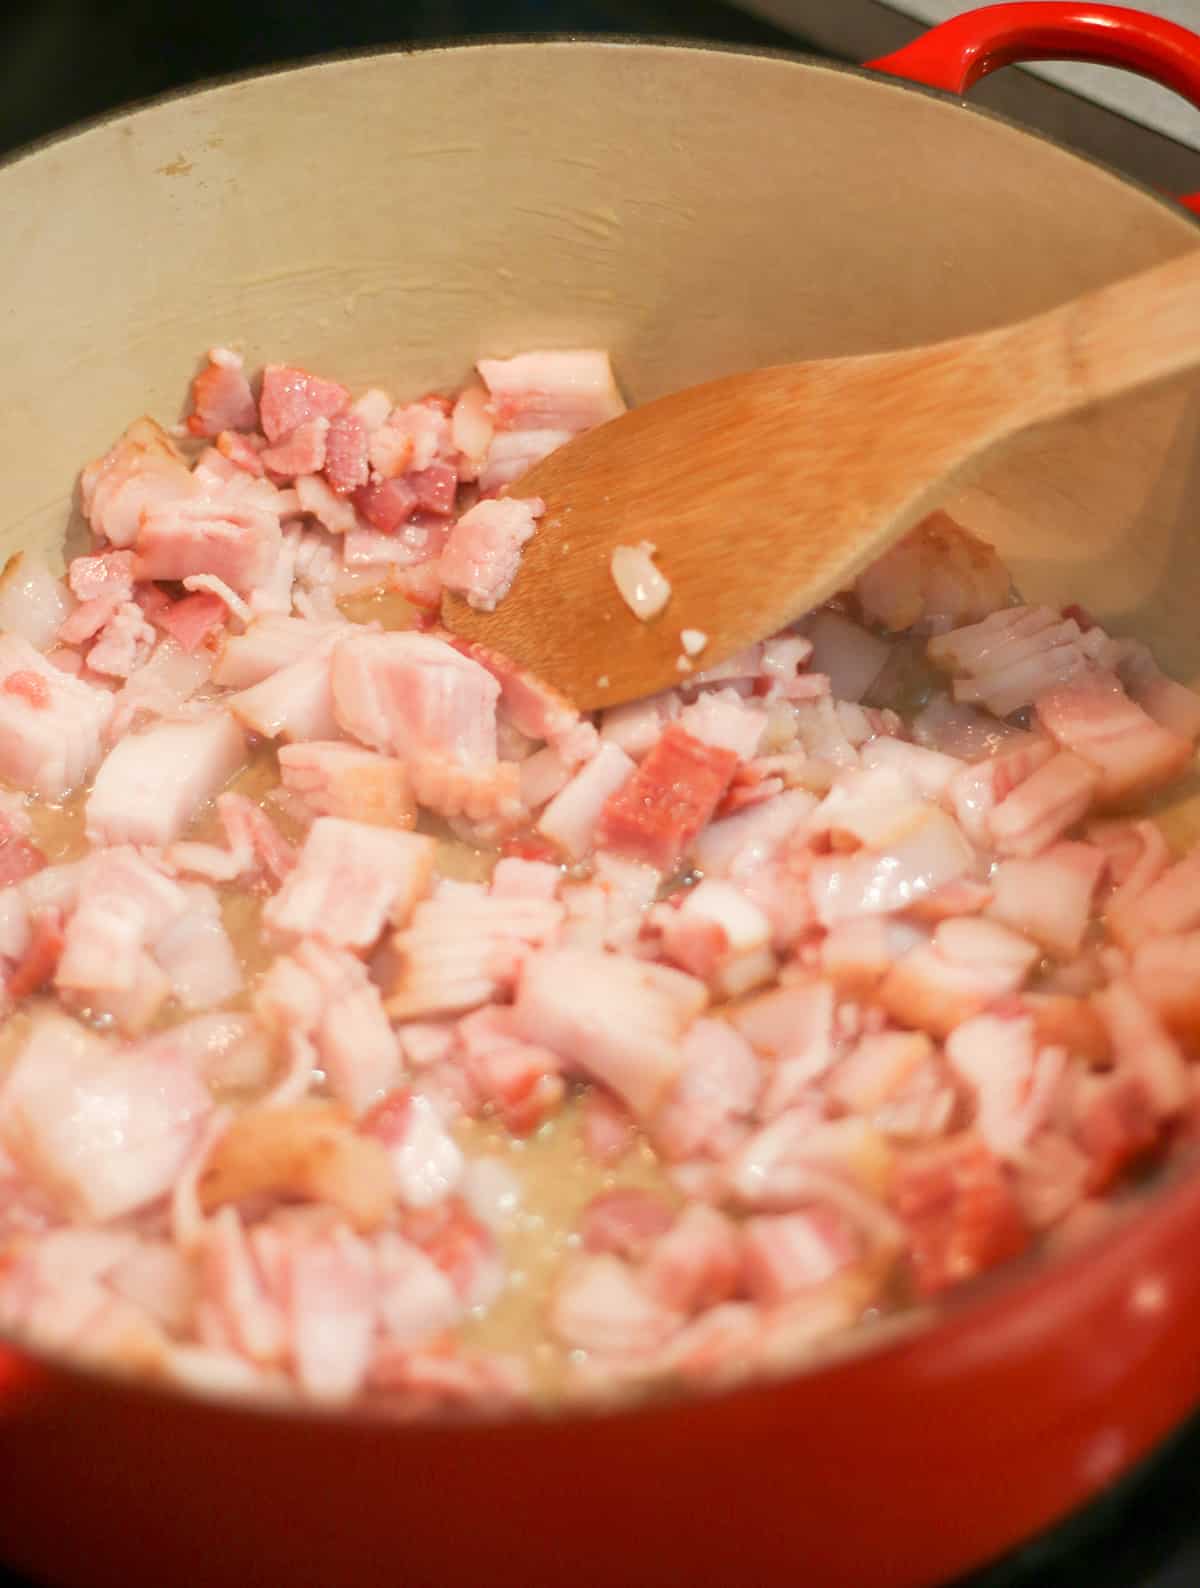 Frying bacon for homemade chili